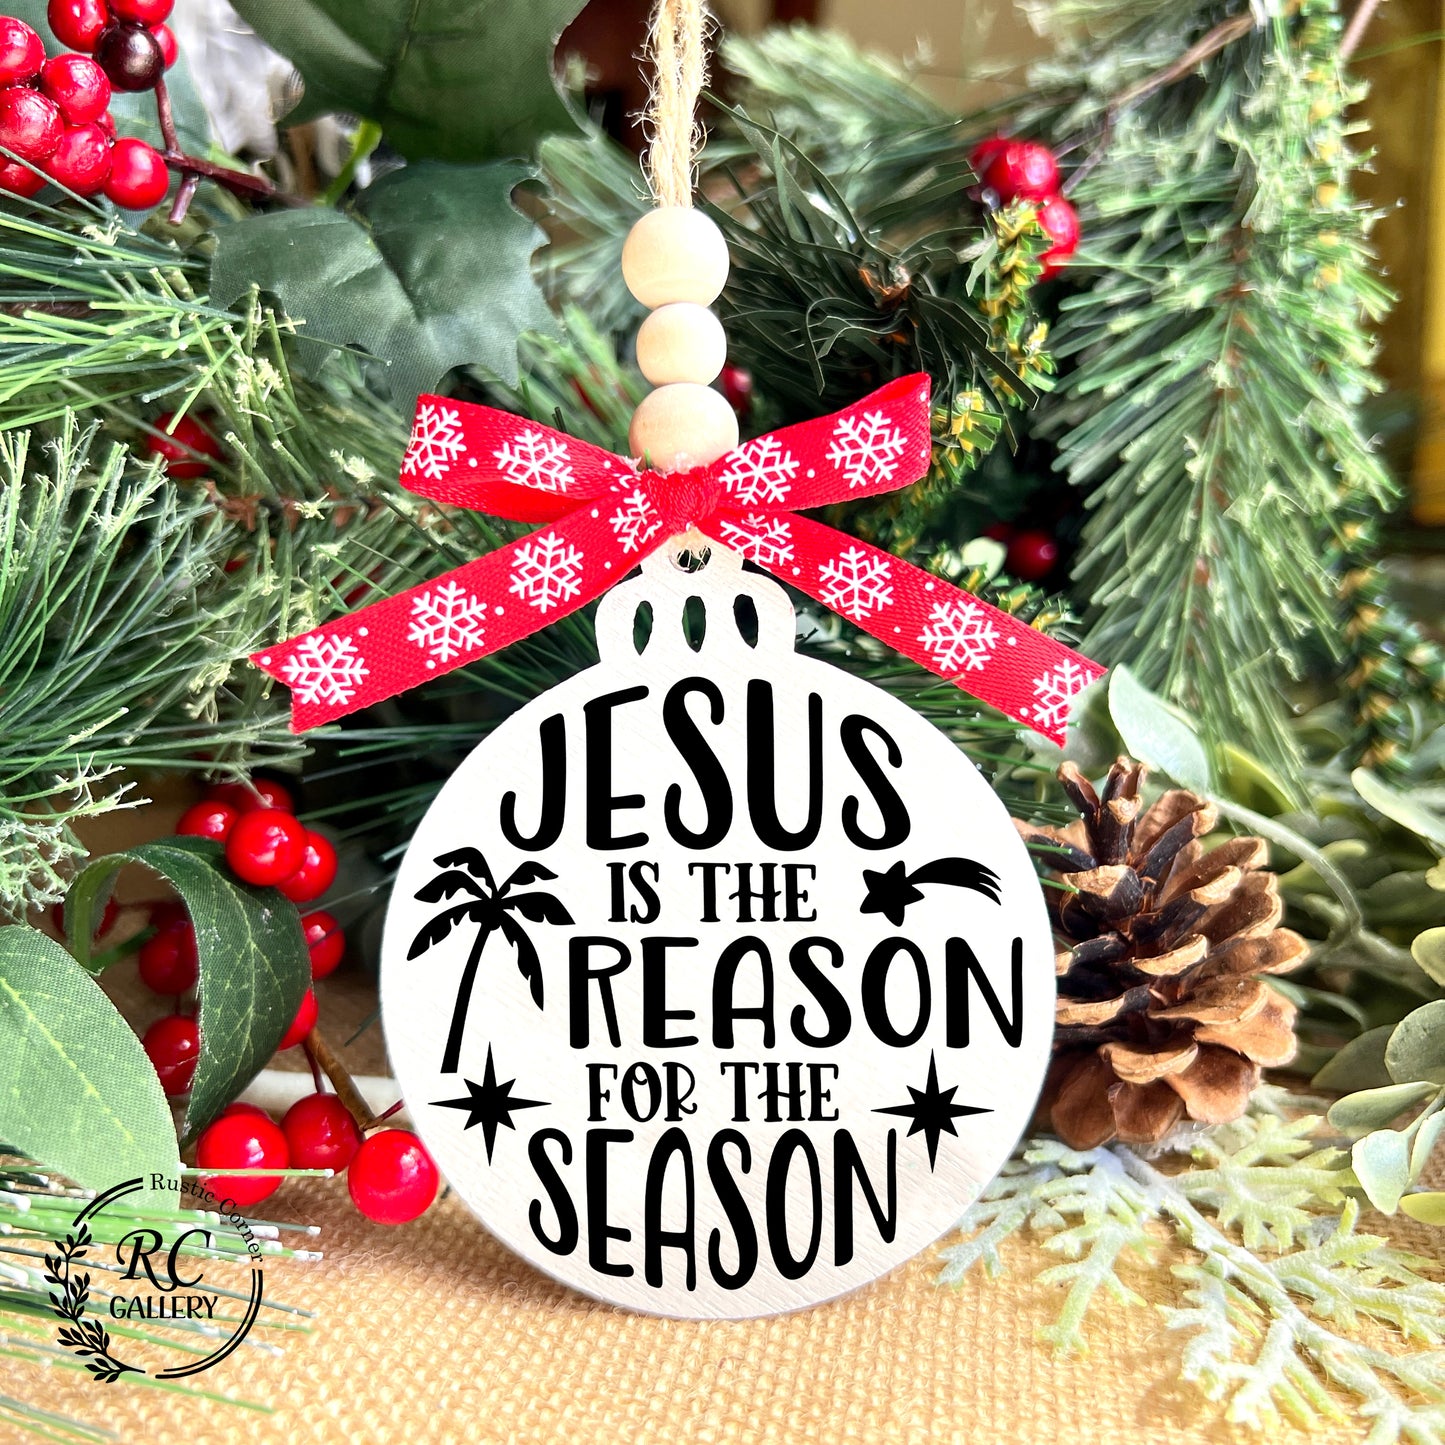 Jesus is the reason for the season Christmas Ornament.